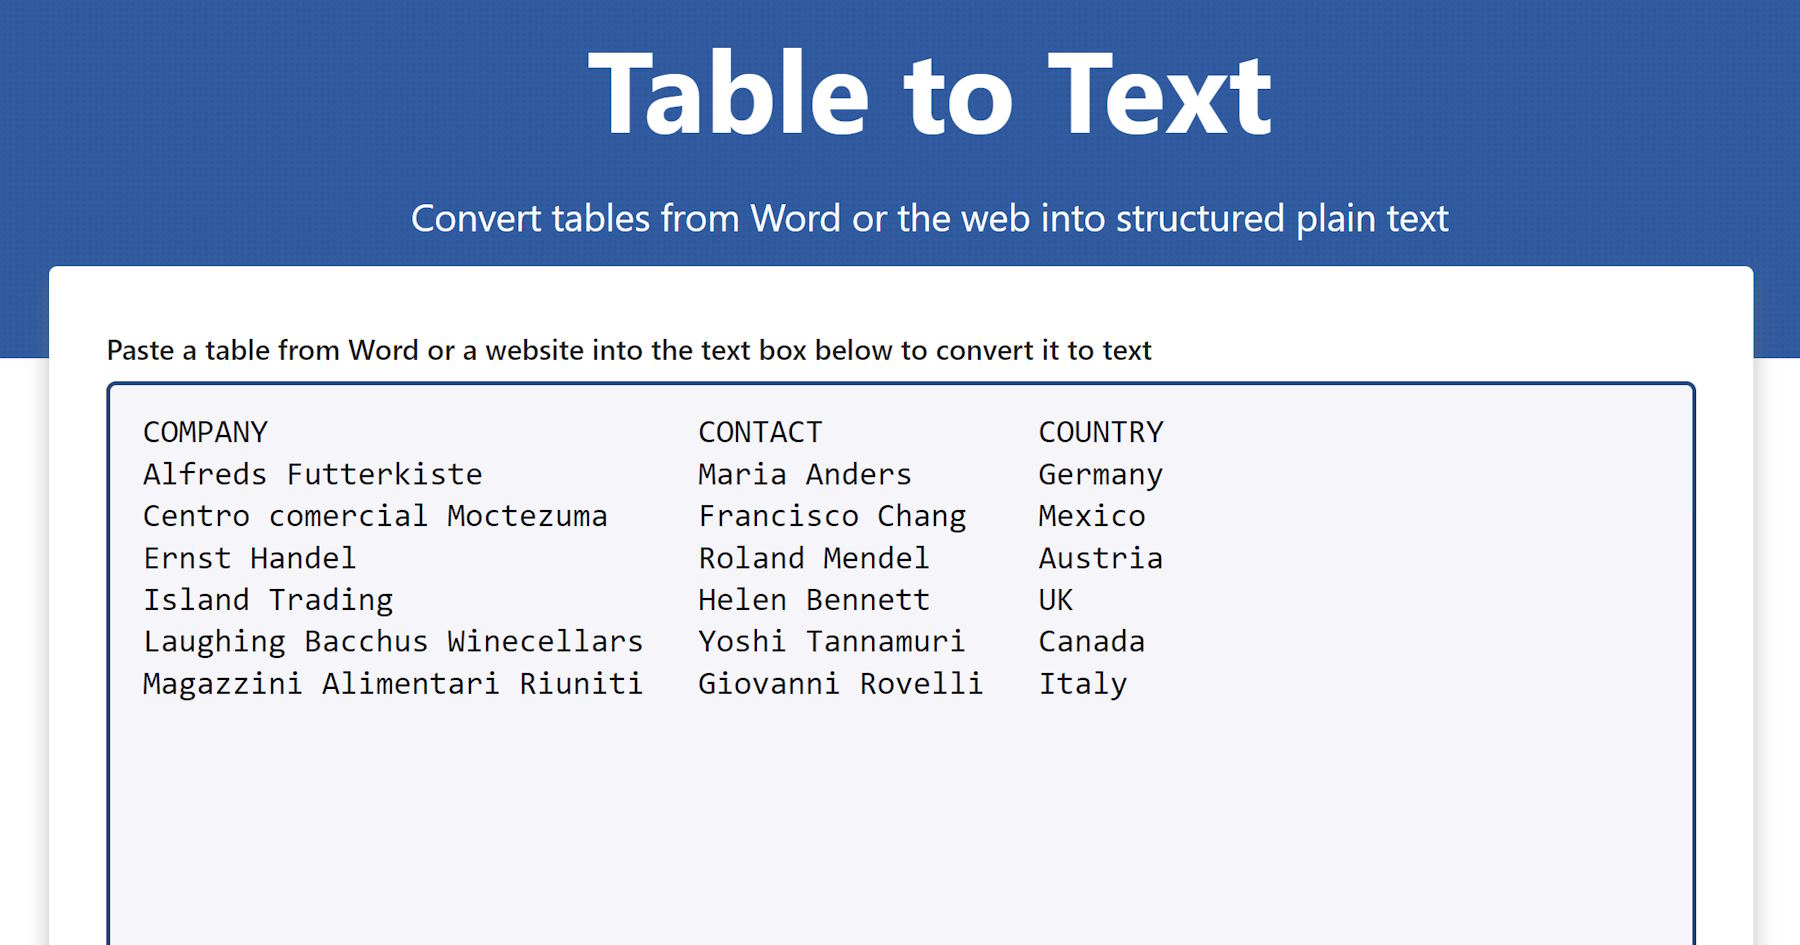 Explore the benefits of converting tables from text editors or websites into plain text format for improved data accessibility and usability. Learn how tools like 'Table to Text' can streamline the data extraction process and enhance the compatibility of table data with different applications.